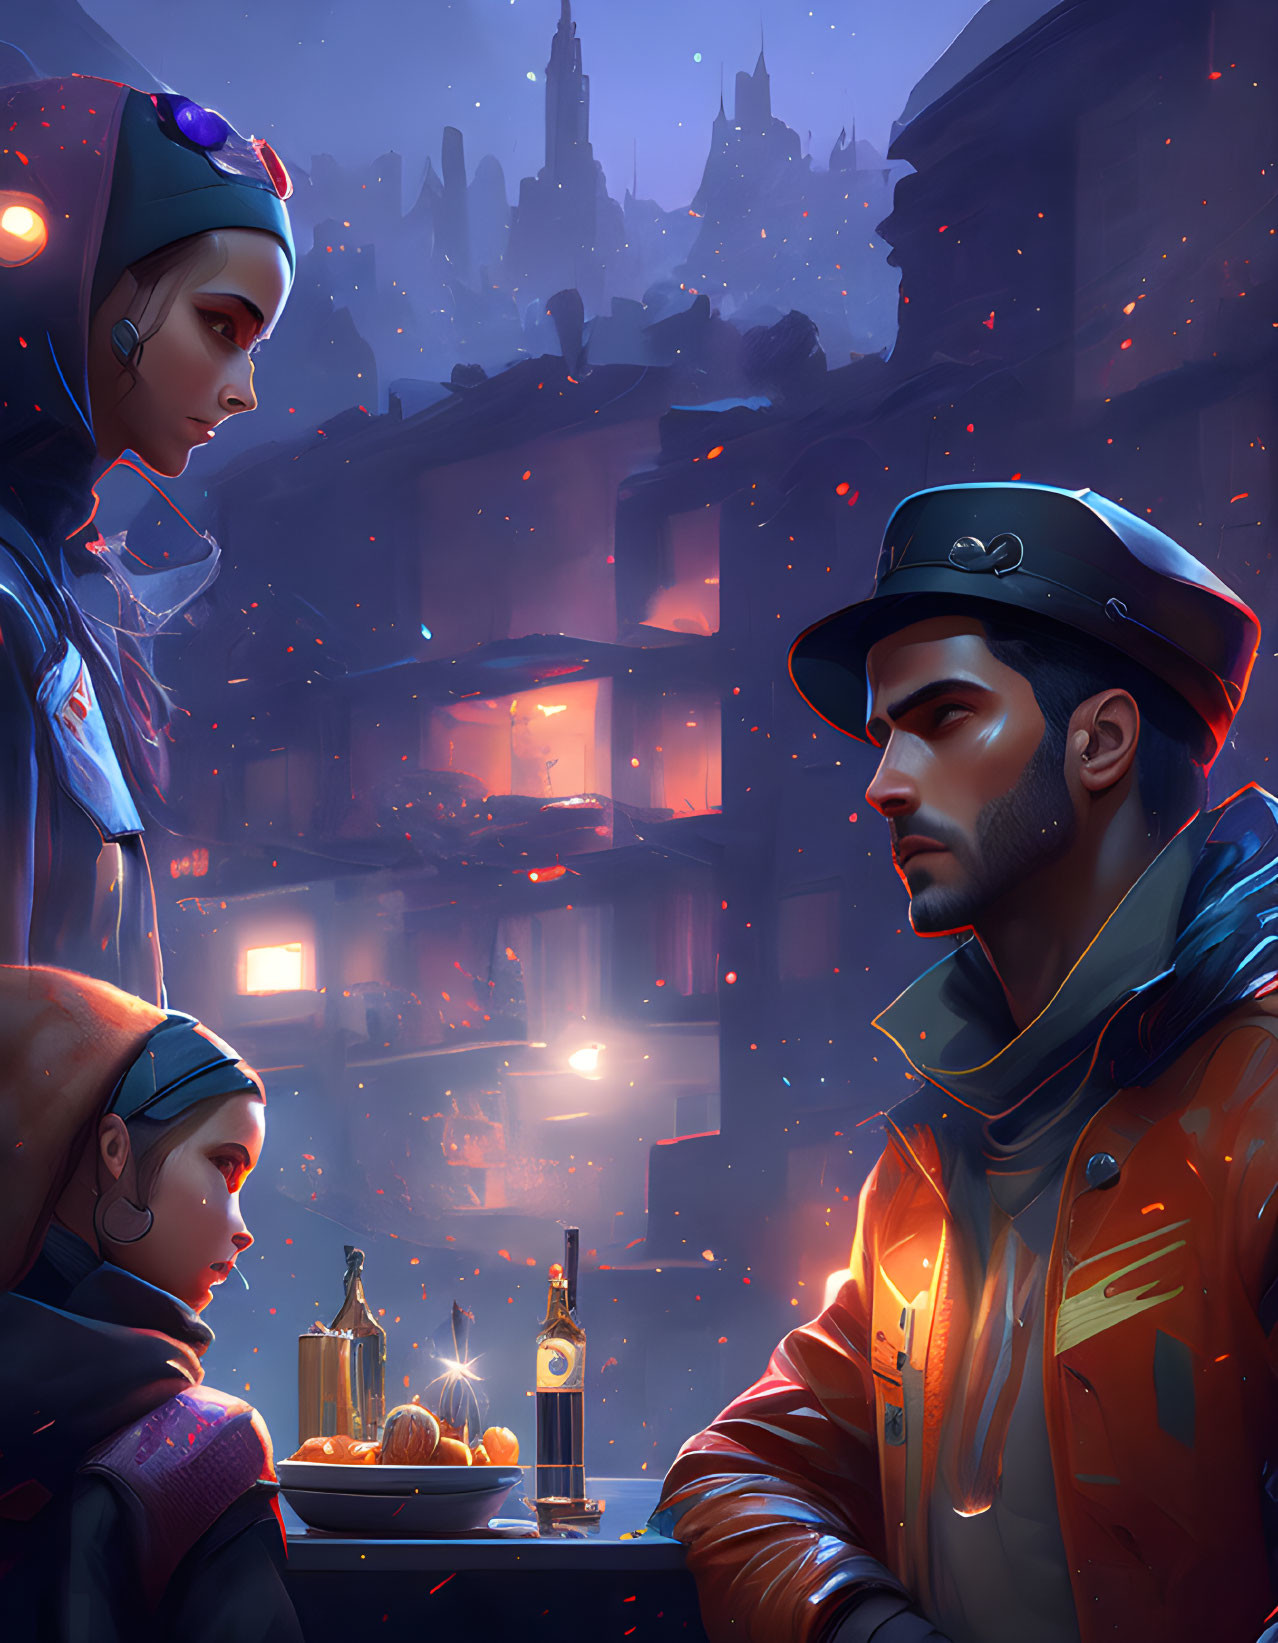 Futuristic street vendor scene with glowing lights and cybernetic elements